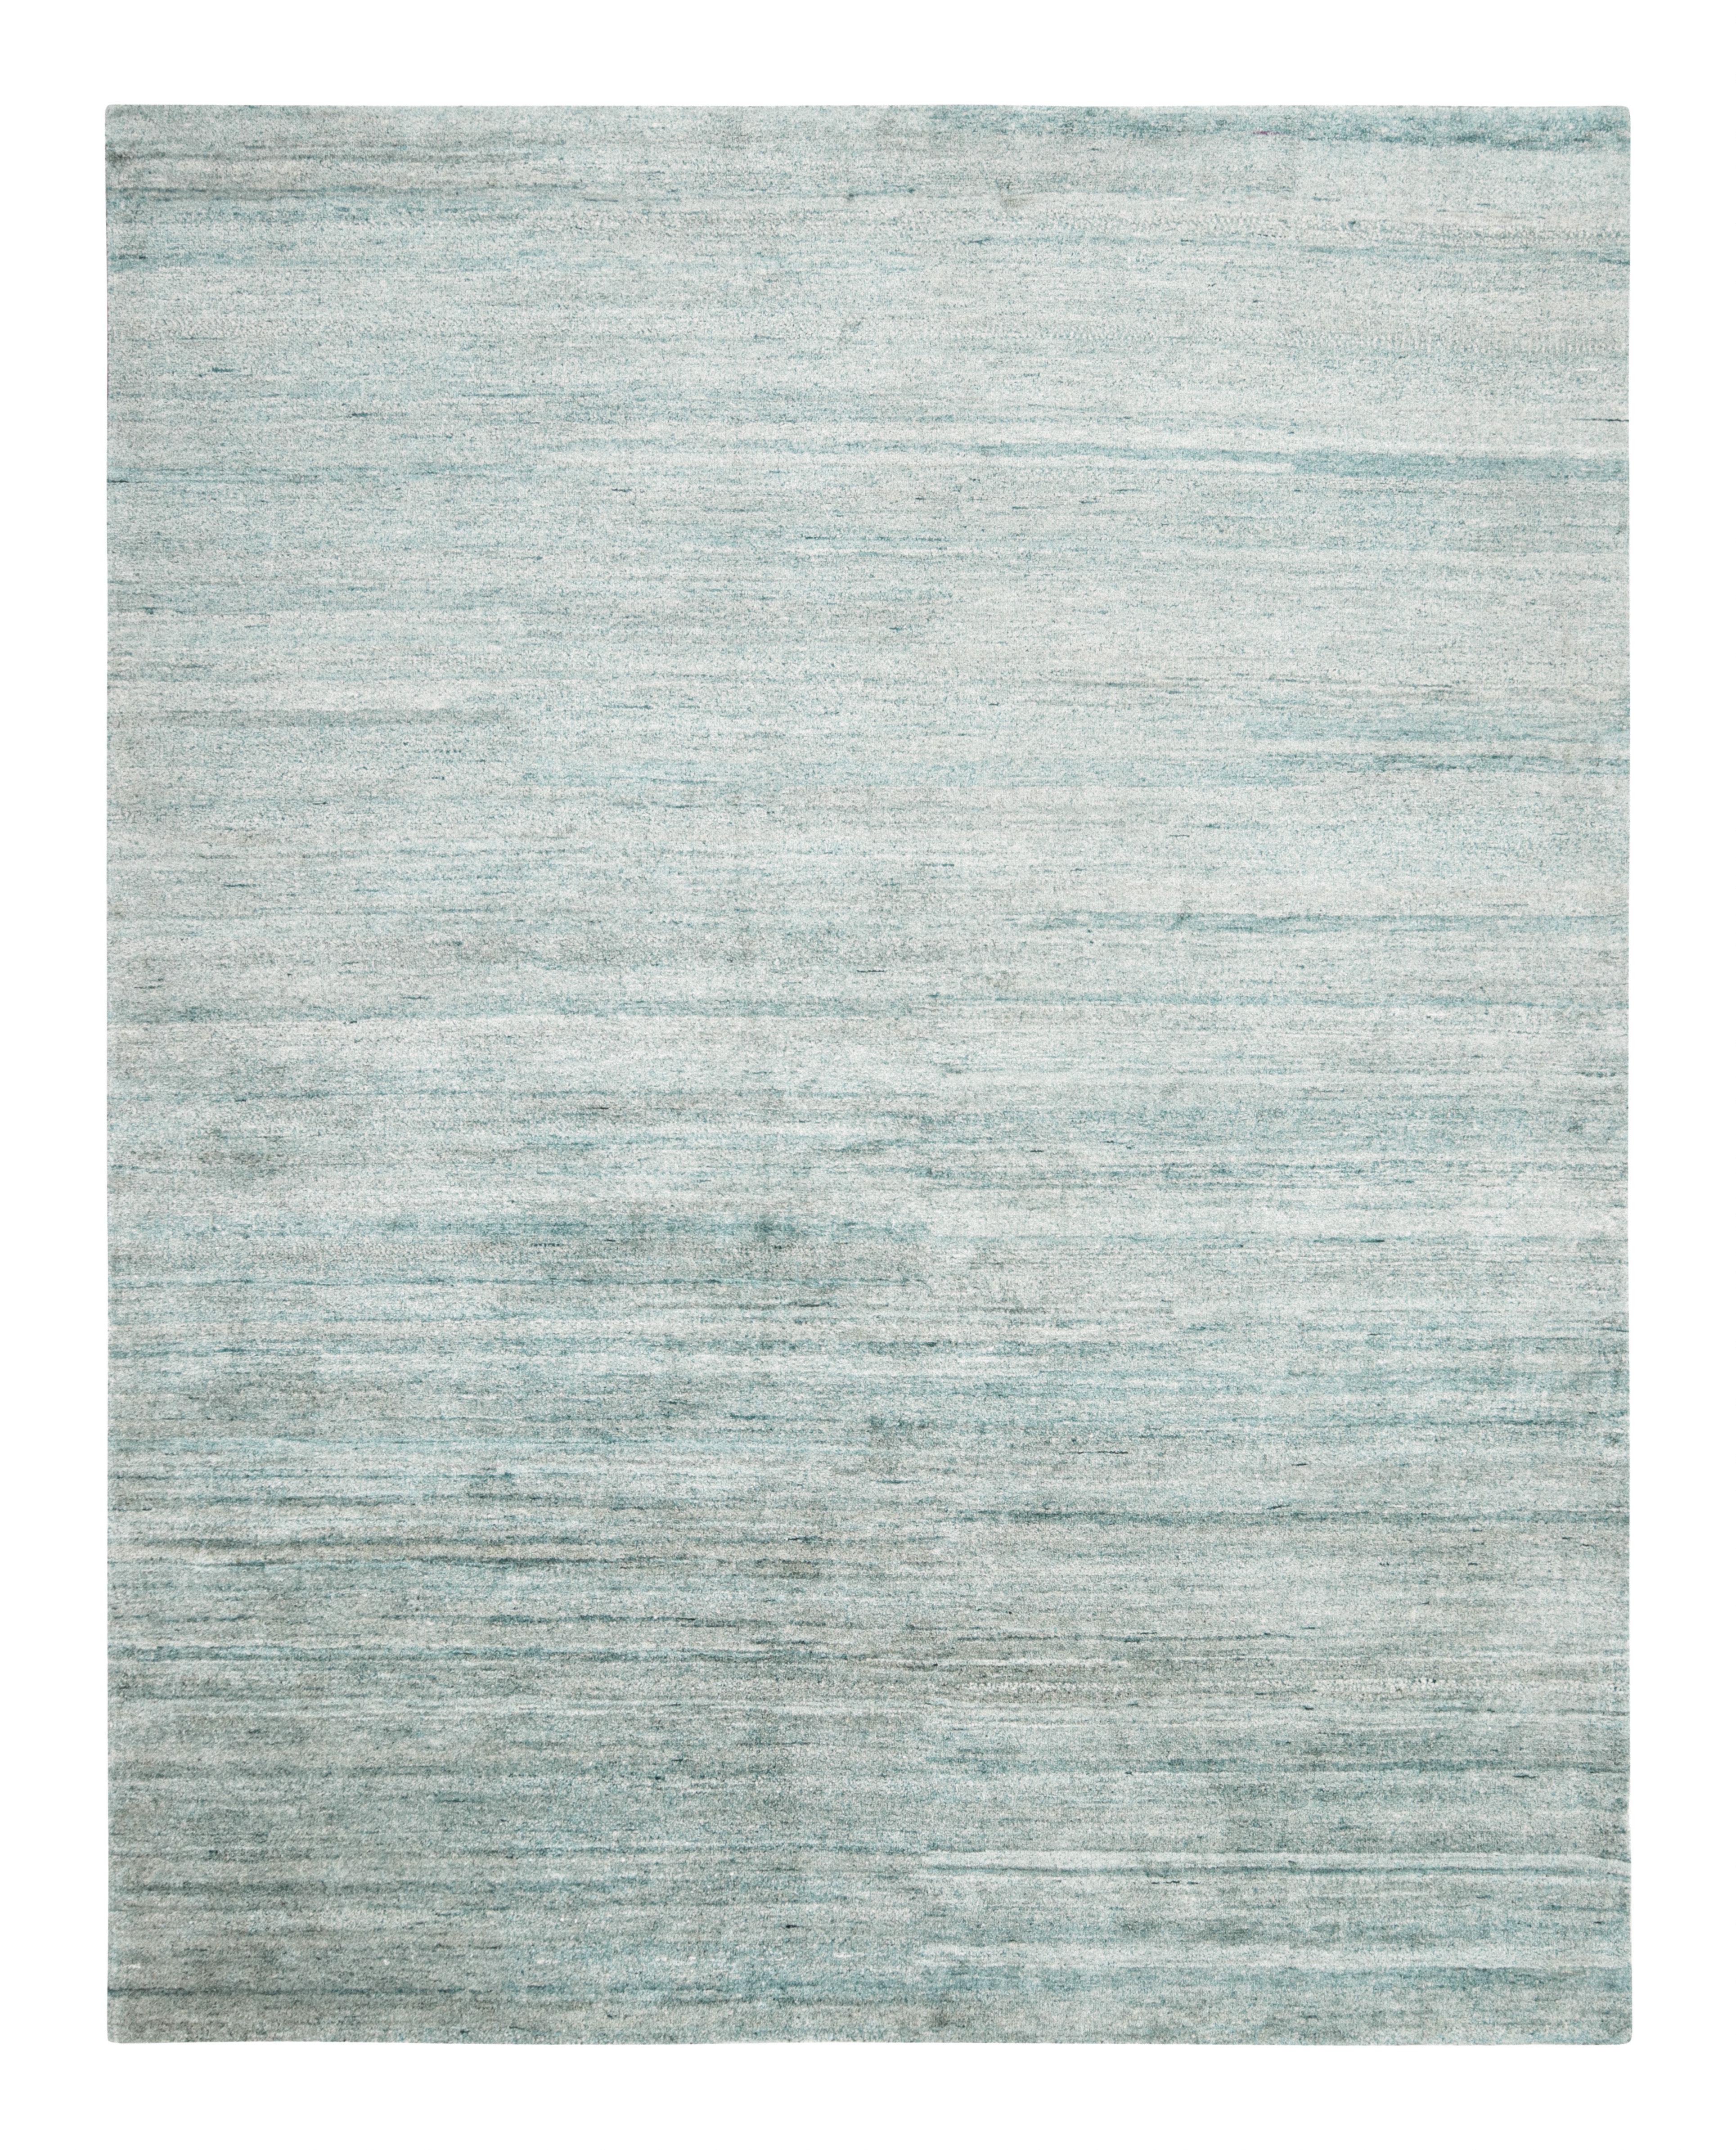 Rug & Kilim’s Textural Rug in Light Blue Tones In New Condition For Sale In Long Island City, NY